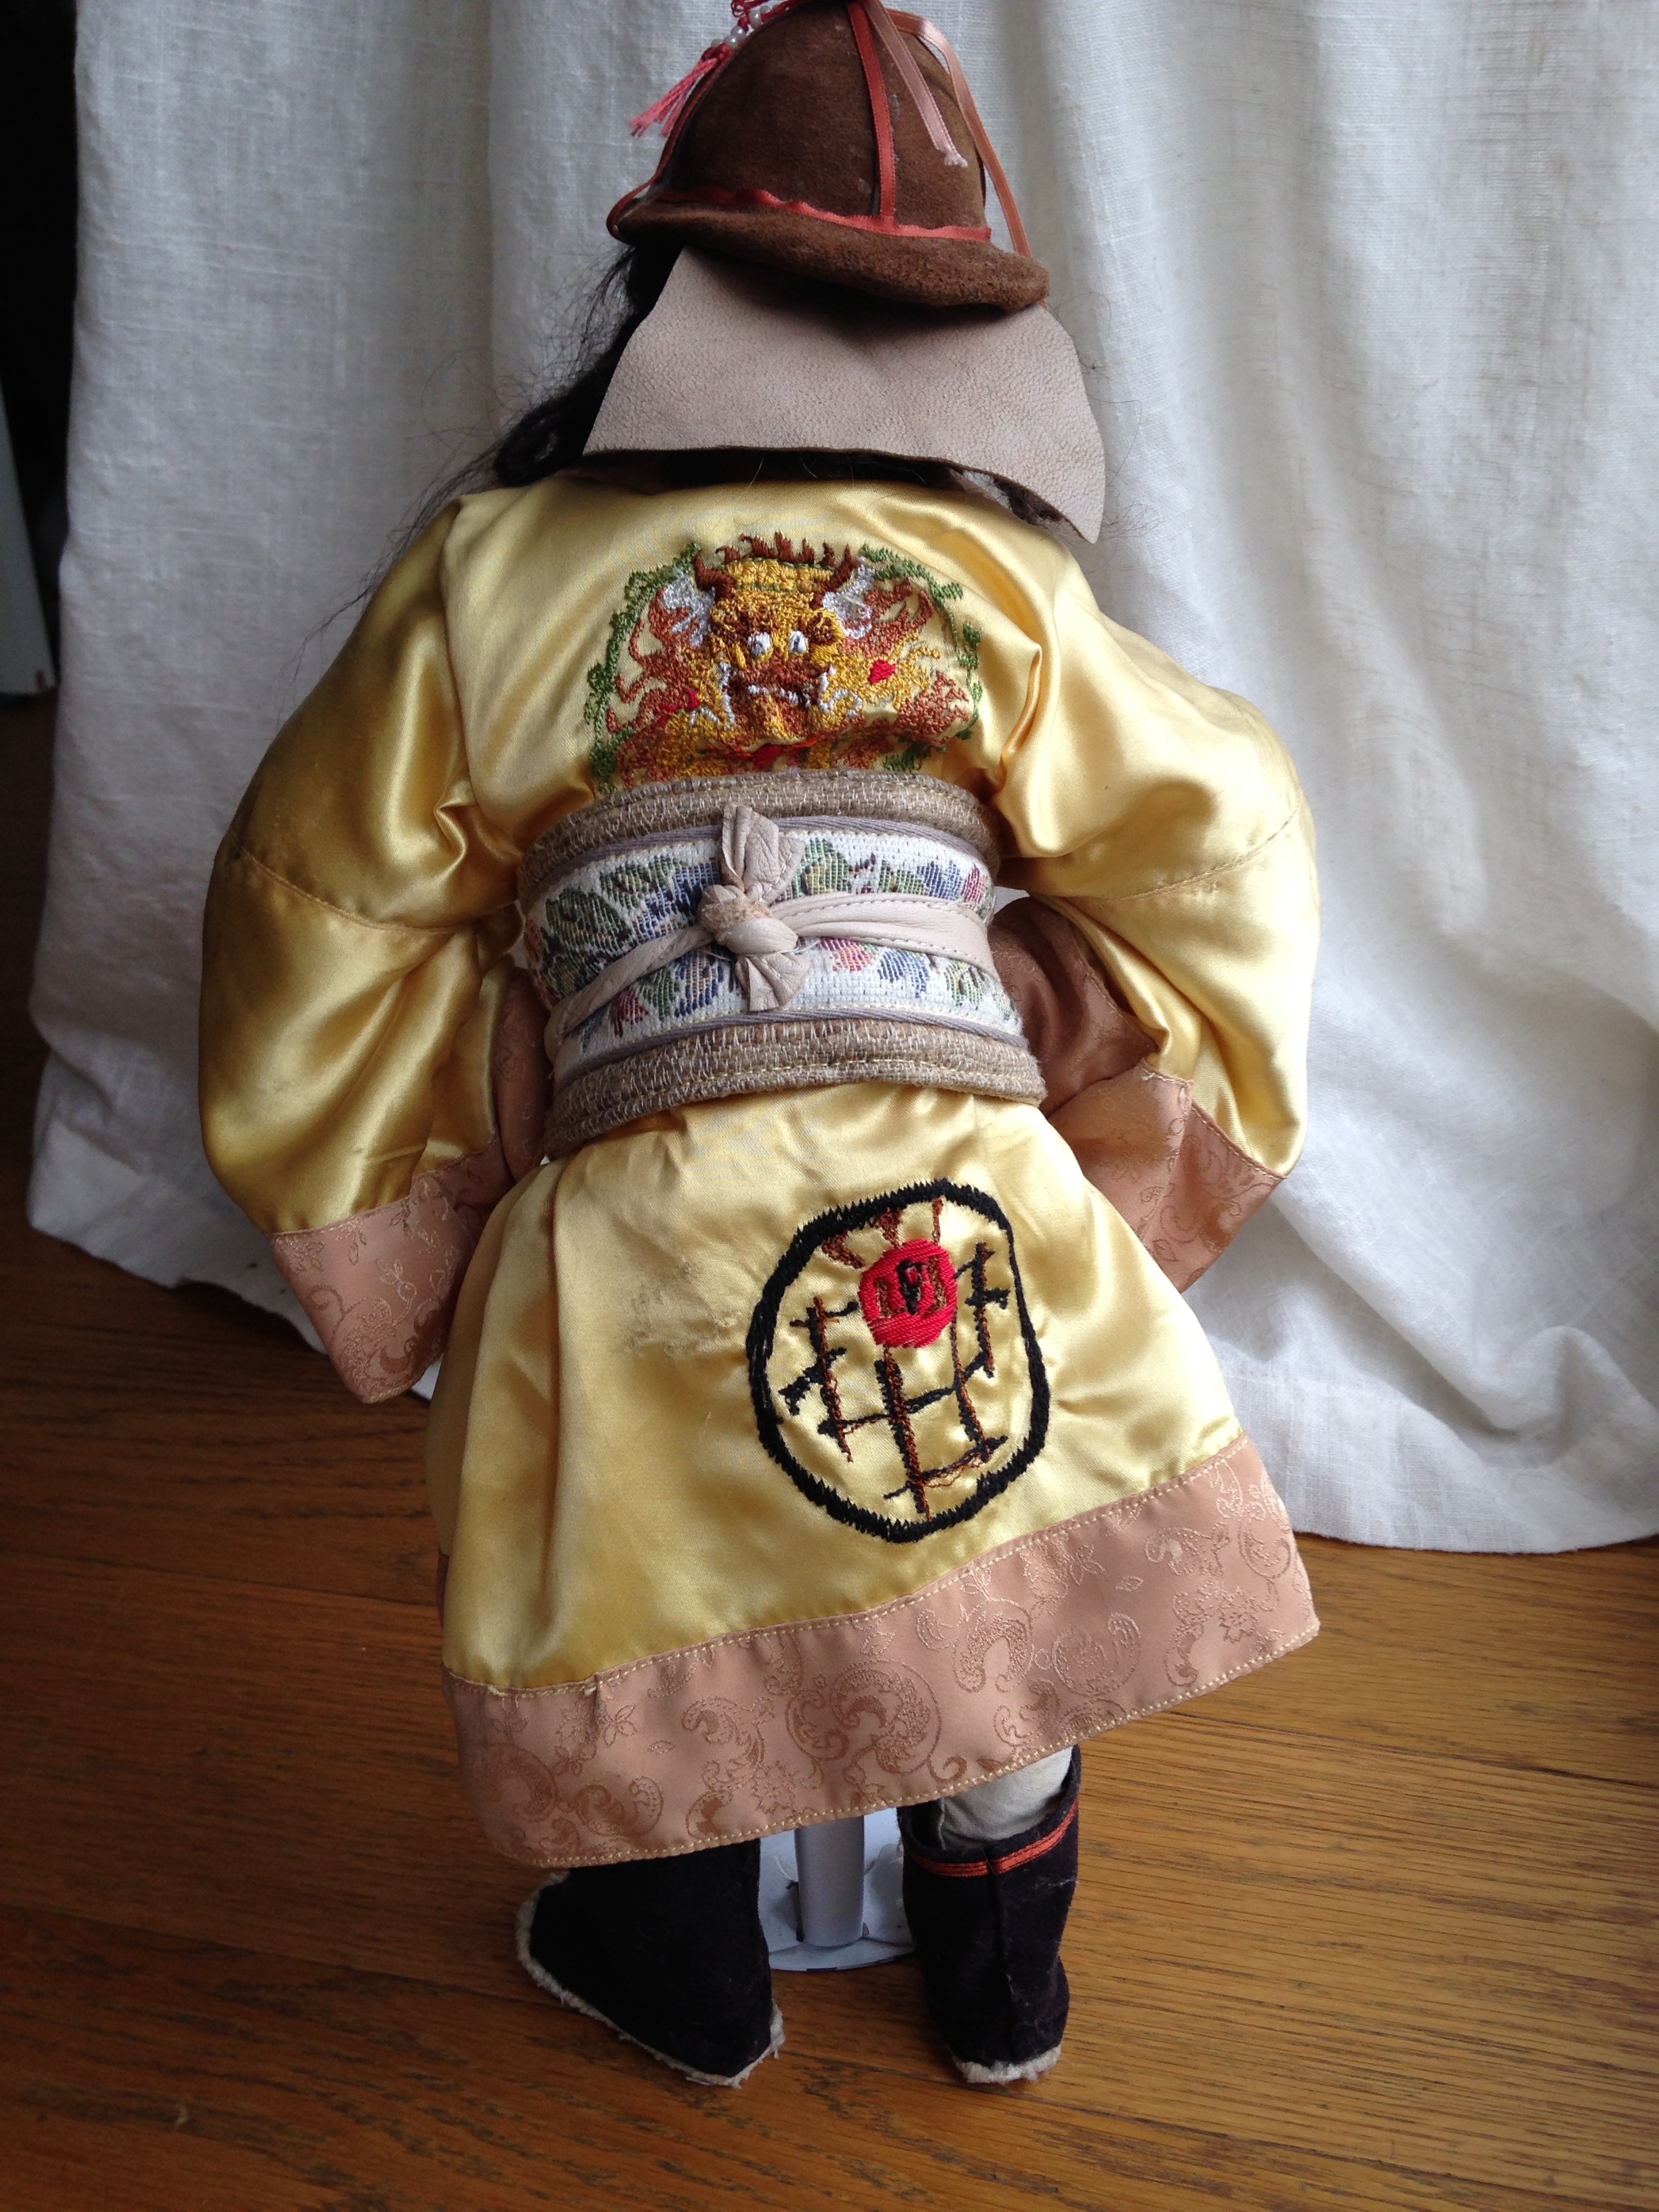 Kublai Kahn costume doll, assignment. Hand and machine embroidery clay and faric craft by Vibeke La. Maltun